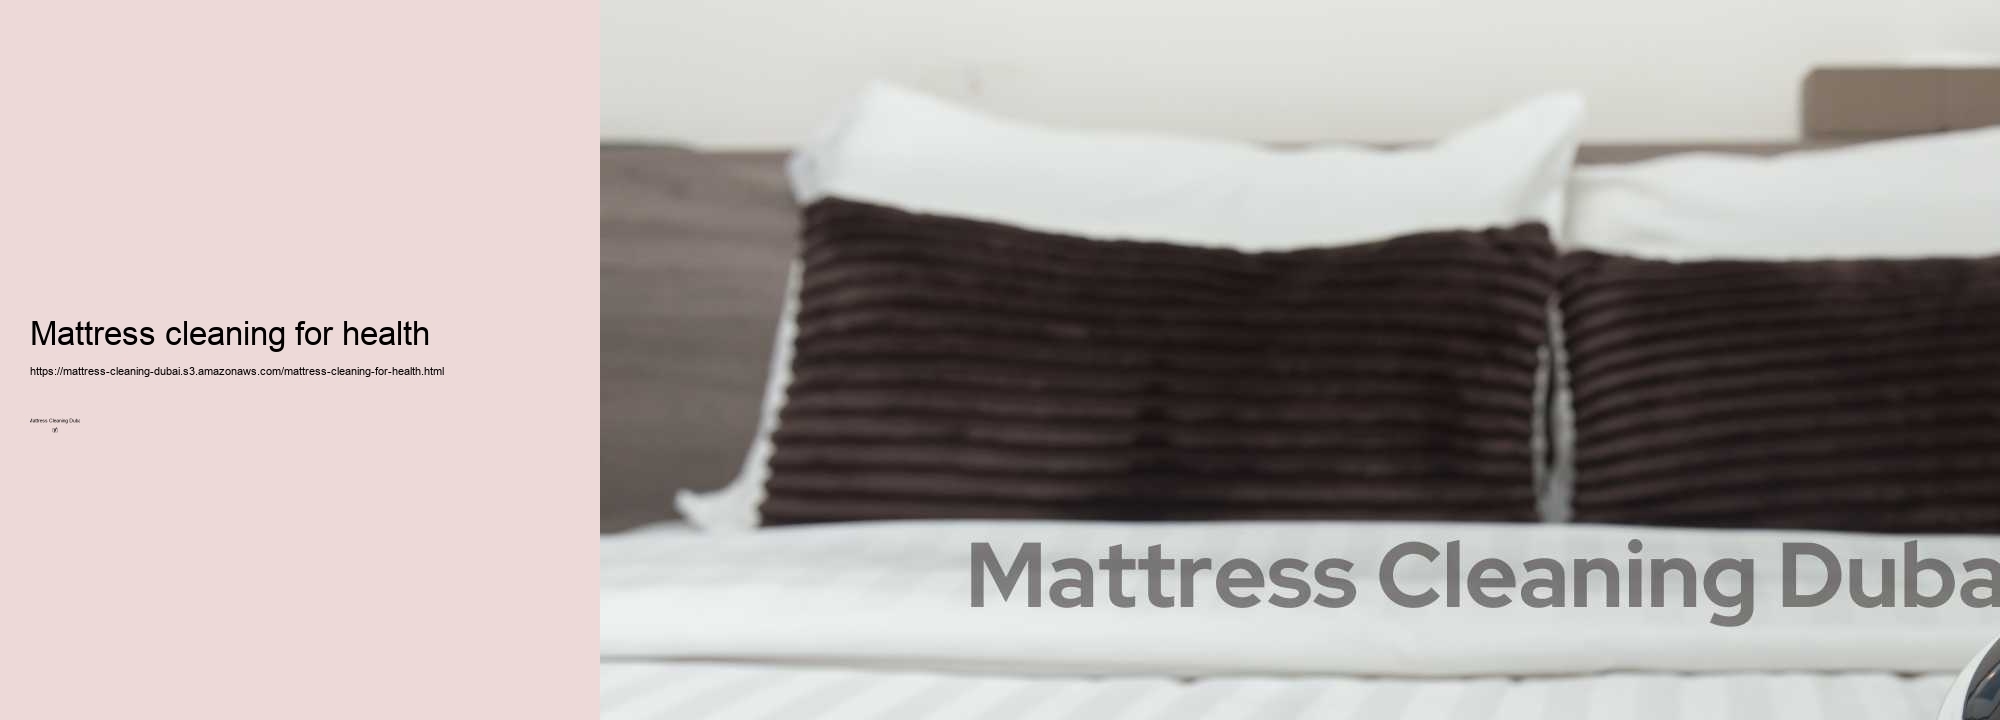 Mattress cleaning for health